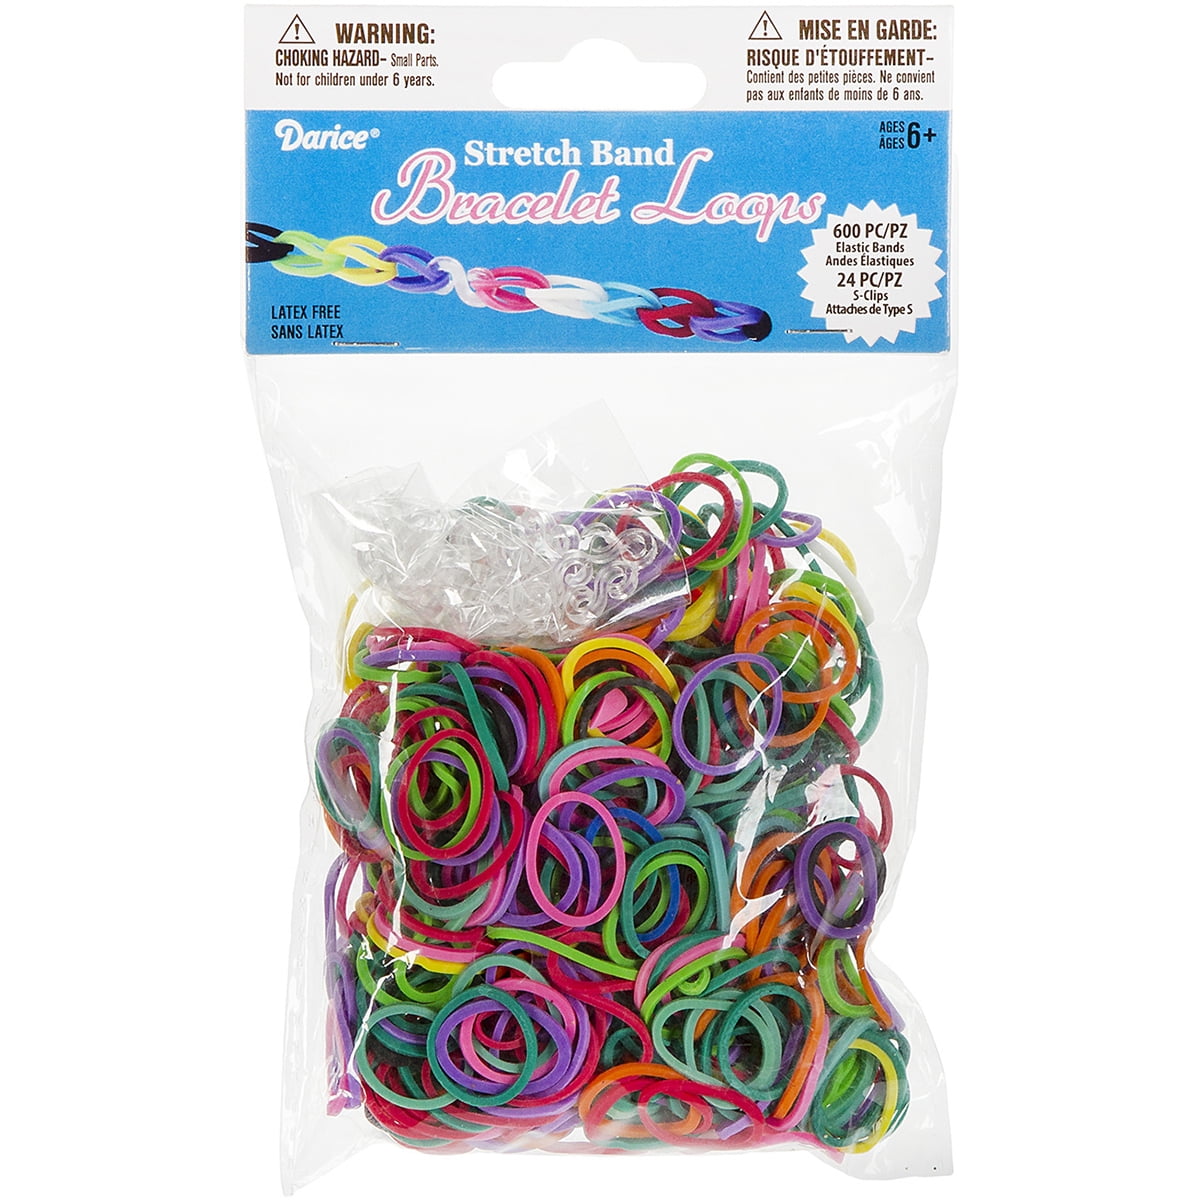 150 6 Darice Stretch Band Bracelet Loops ,Multicolor Bead Style Bands & Clips 